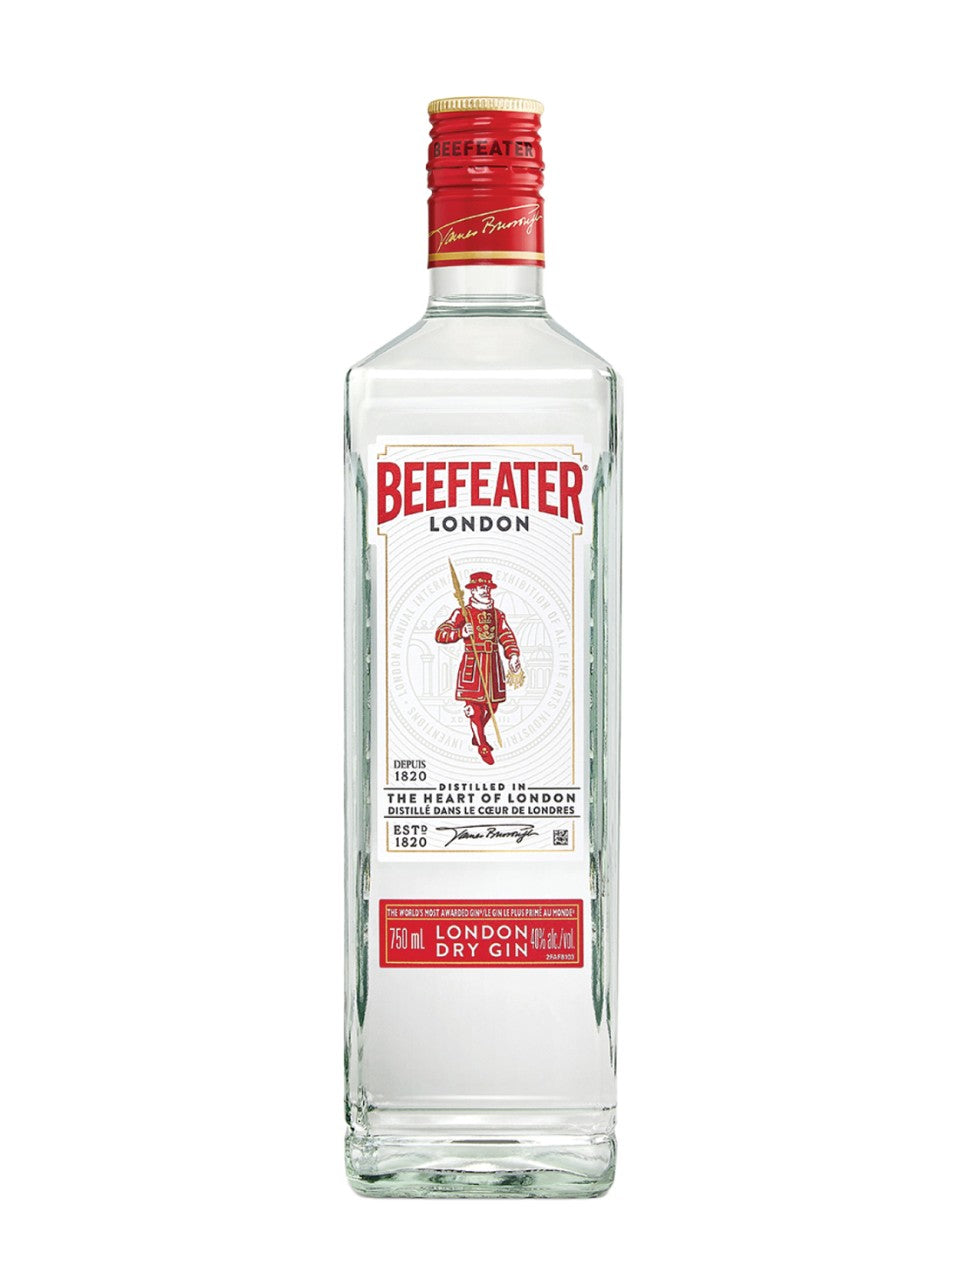 Beefeater London Dry Gin 750 ml bottle